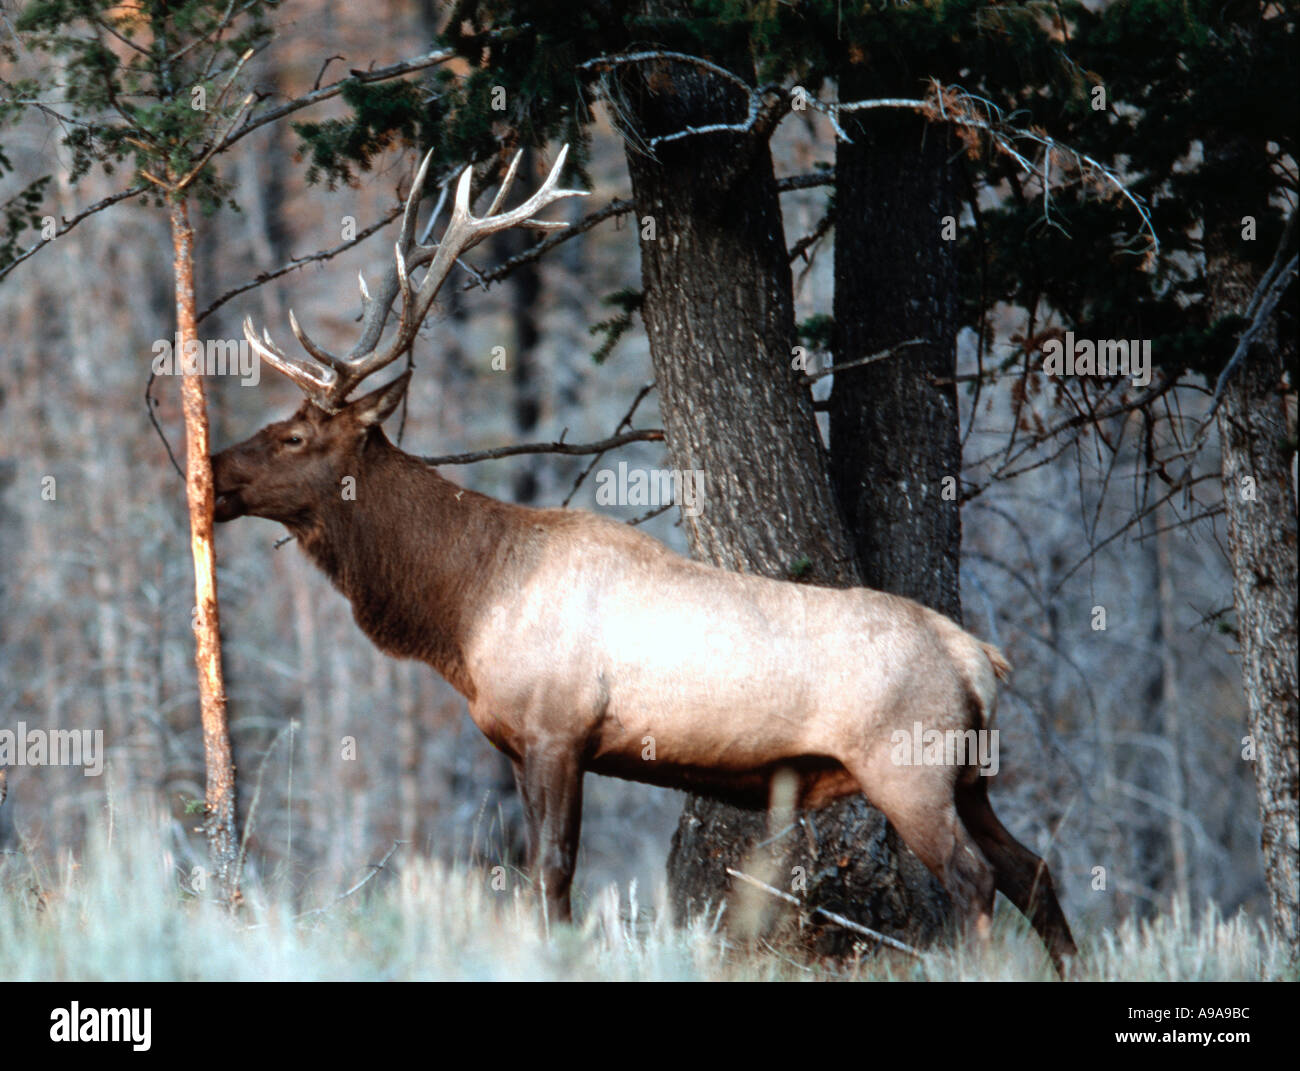 Rocky Mountain Bull Elk or Wapiti Cervus Elaphus shown rubbing his antlers against a small sapling during the fall rutt Stock Photo